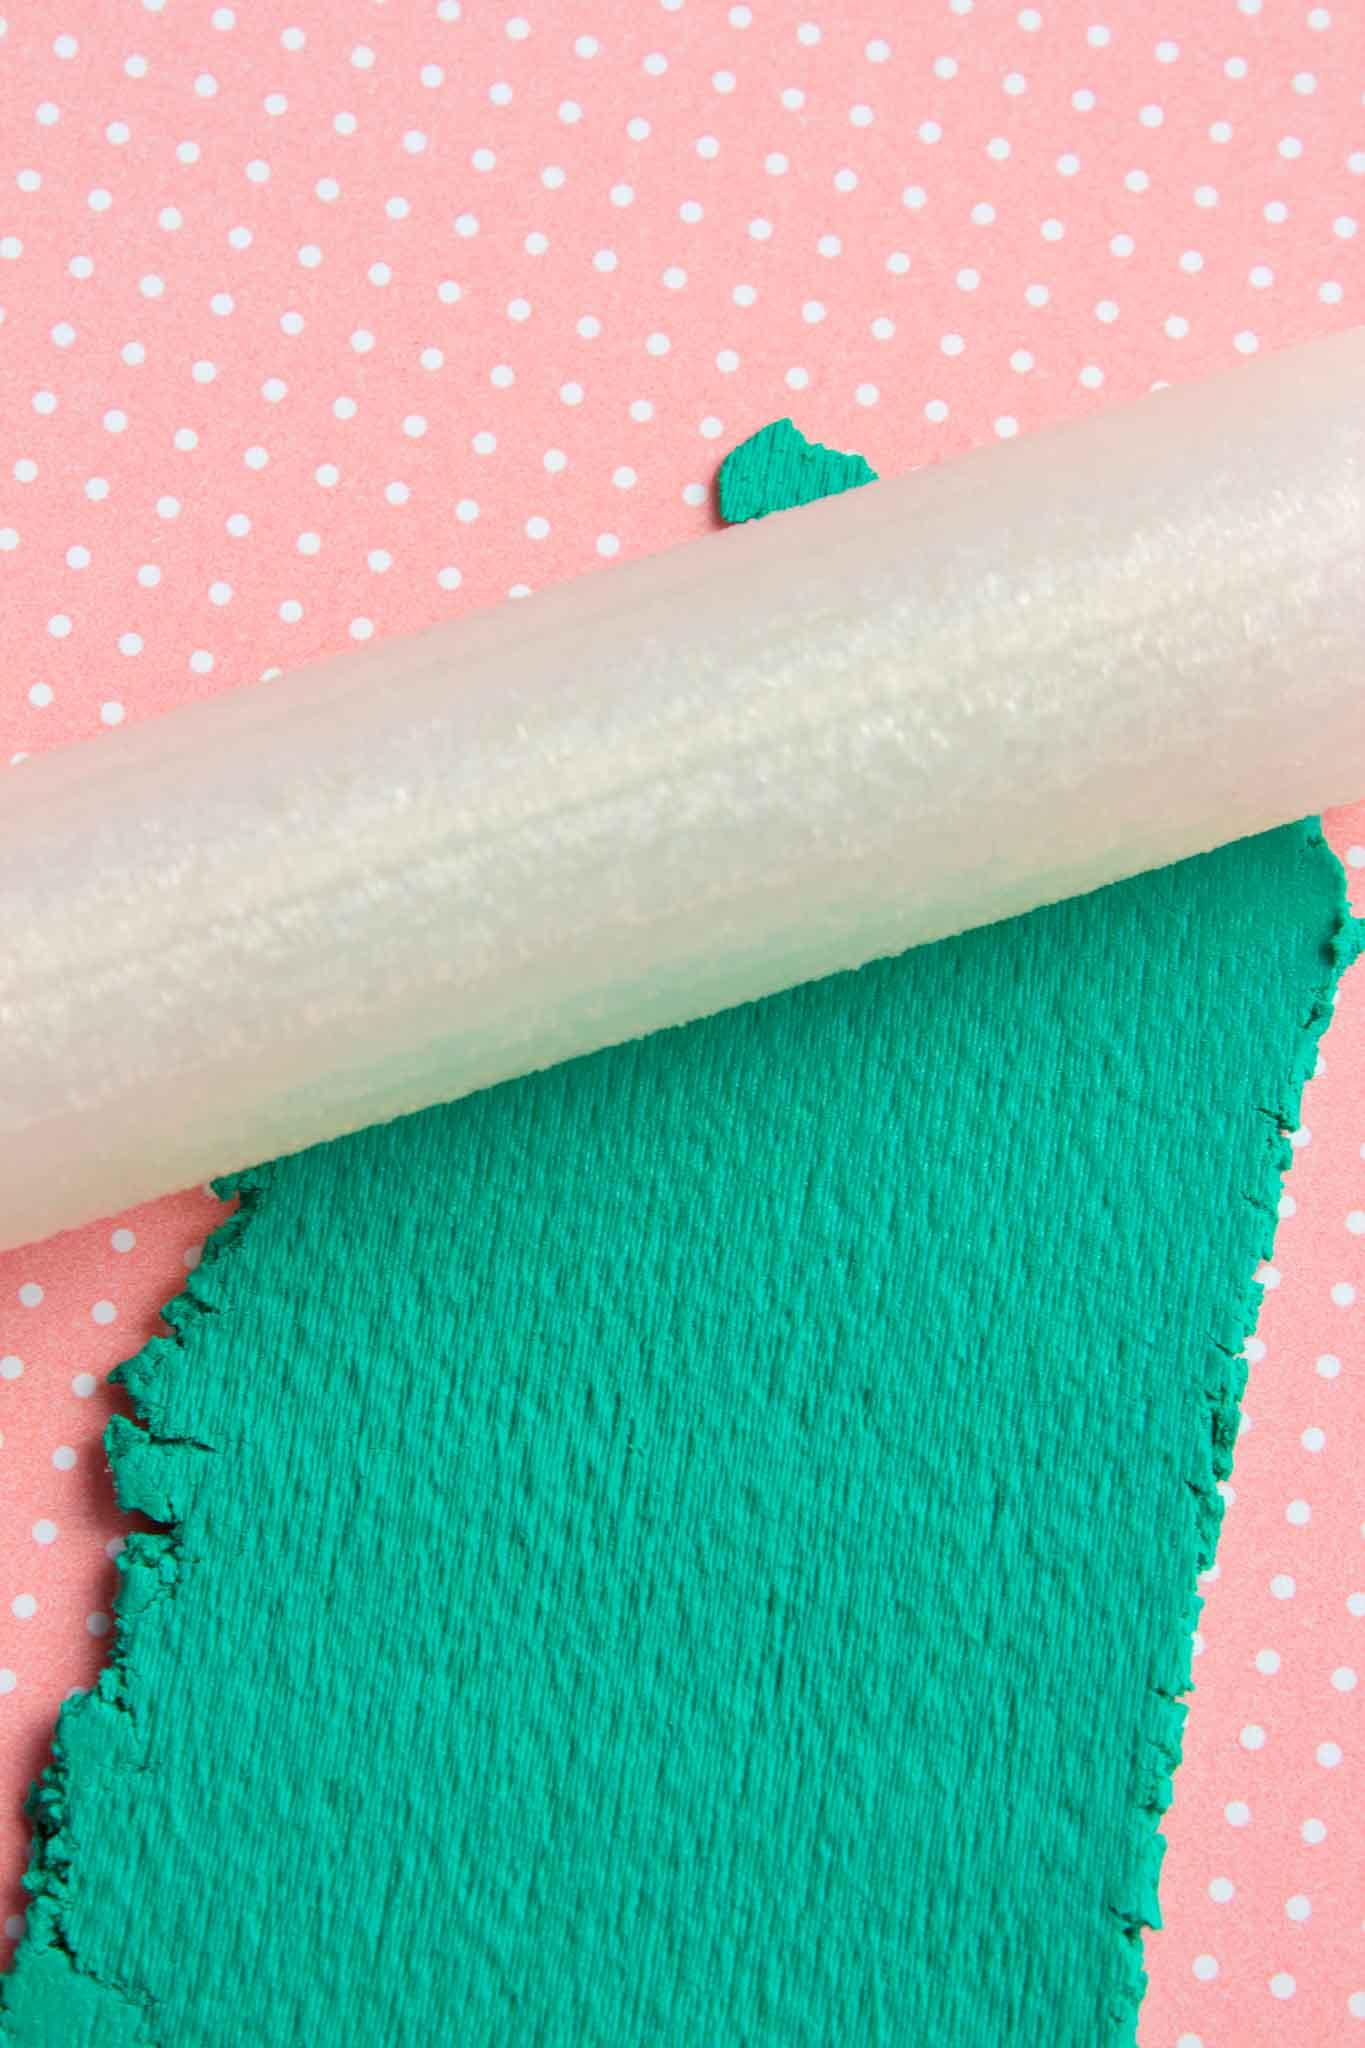 Sandpaper texture roller for polymer clay